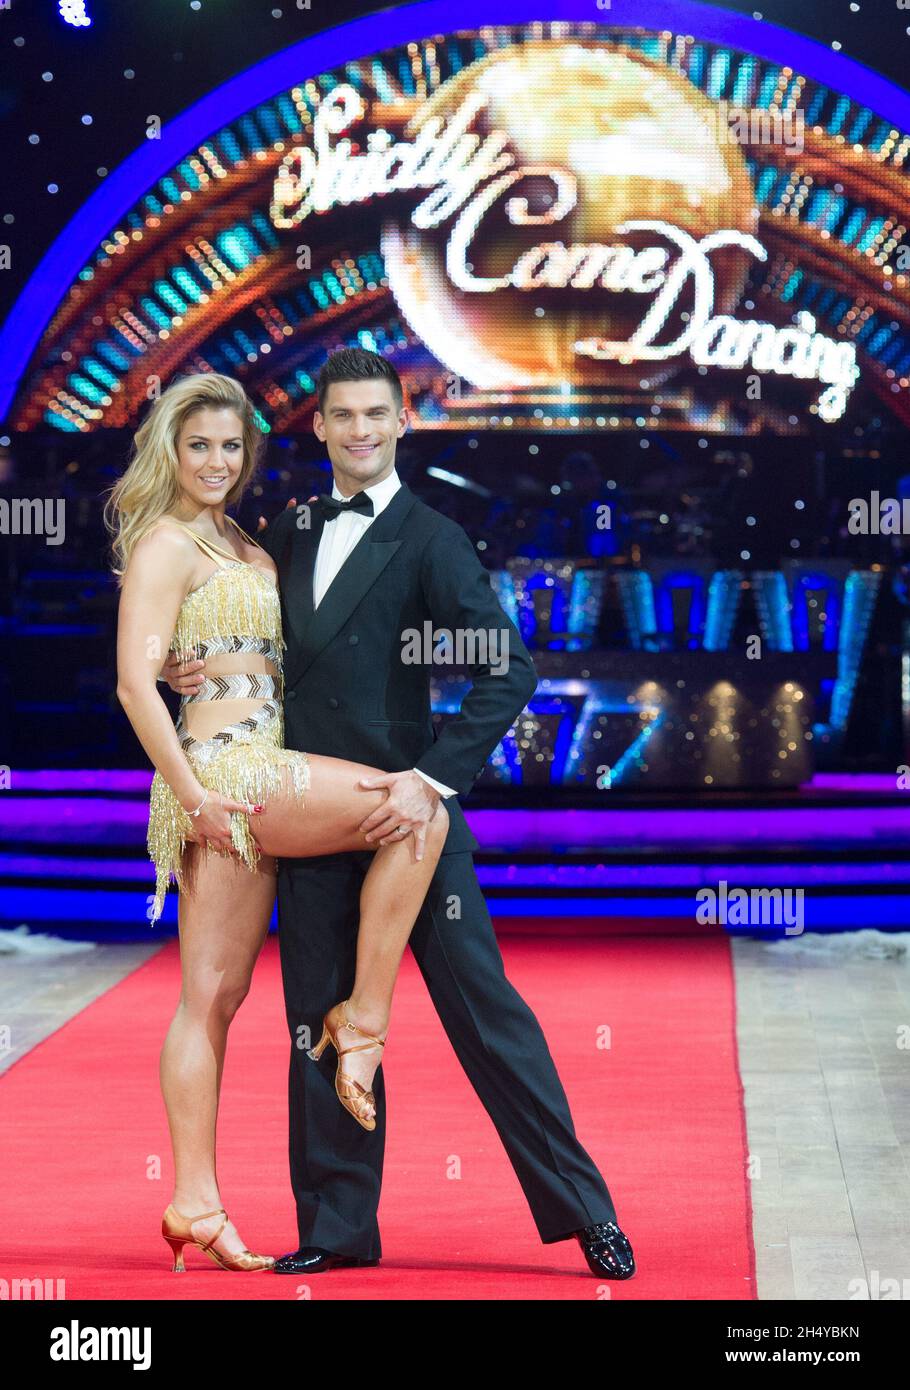 Gemma Atkinson and Aljaz Skorjanec posing during photocall before the opening night of Strictly Come Dancing Tour 2018 at Arena Birmingham in Birmingham, UK. Picture date: Thursday 18 January, 2018. Photo credit: Katja Ogrin/ EMPICS Entertainment. Stock Photo